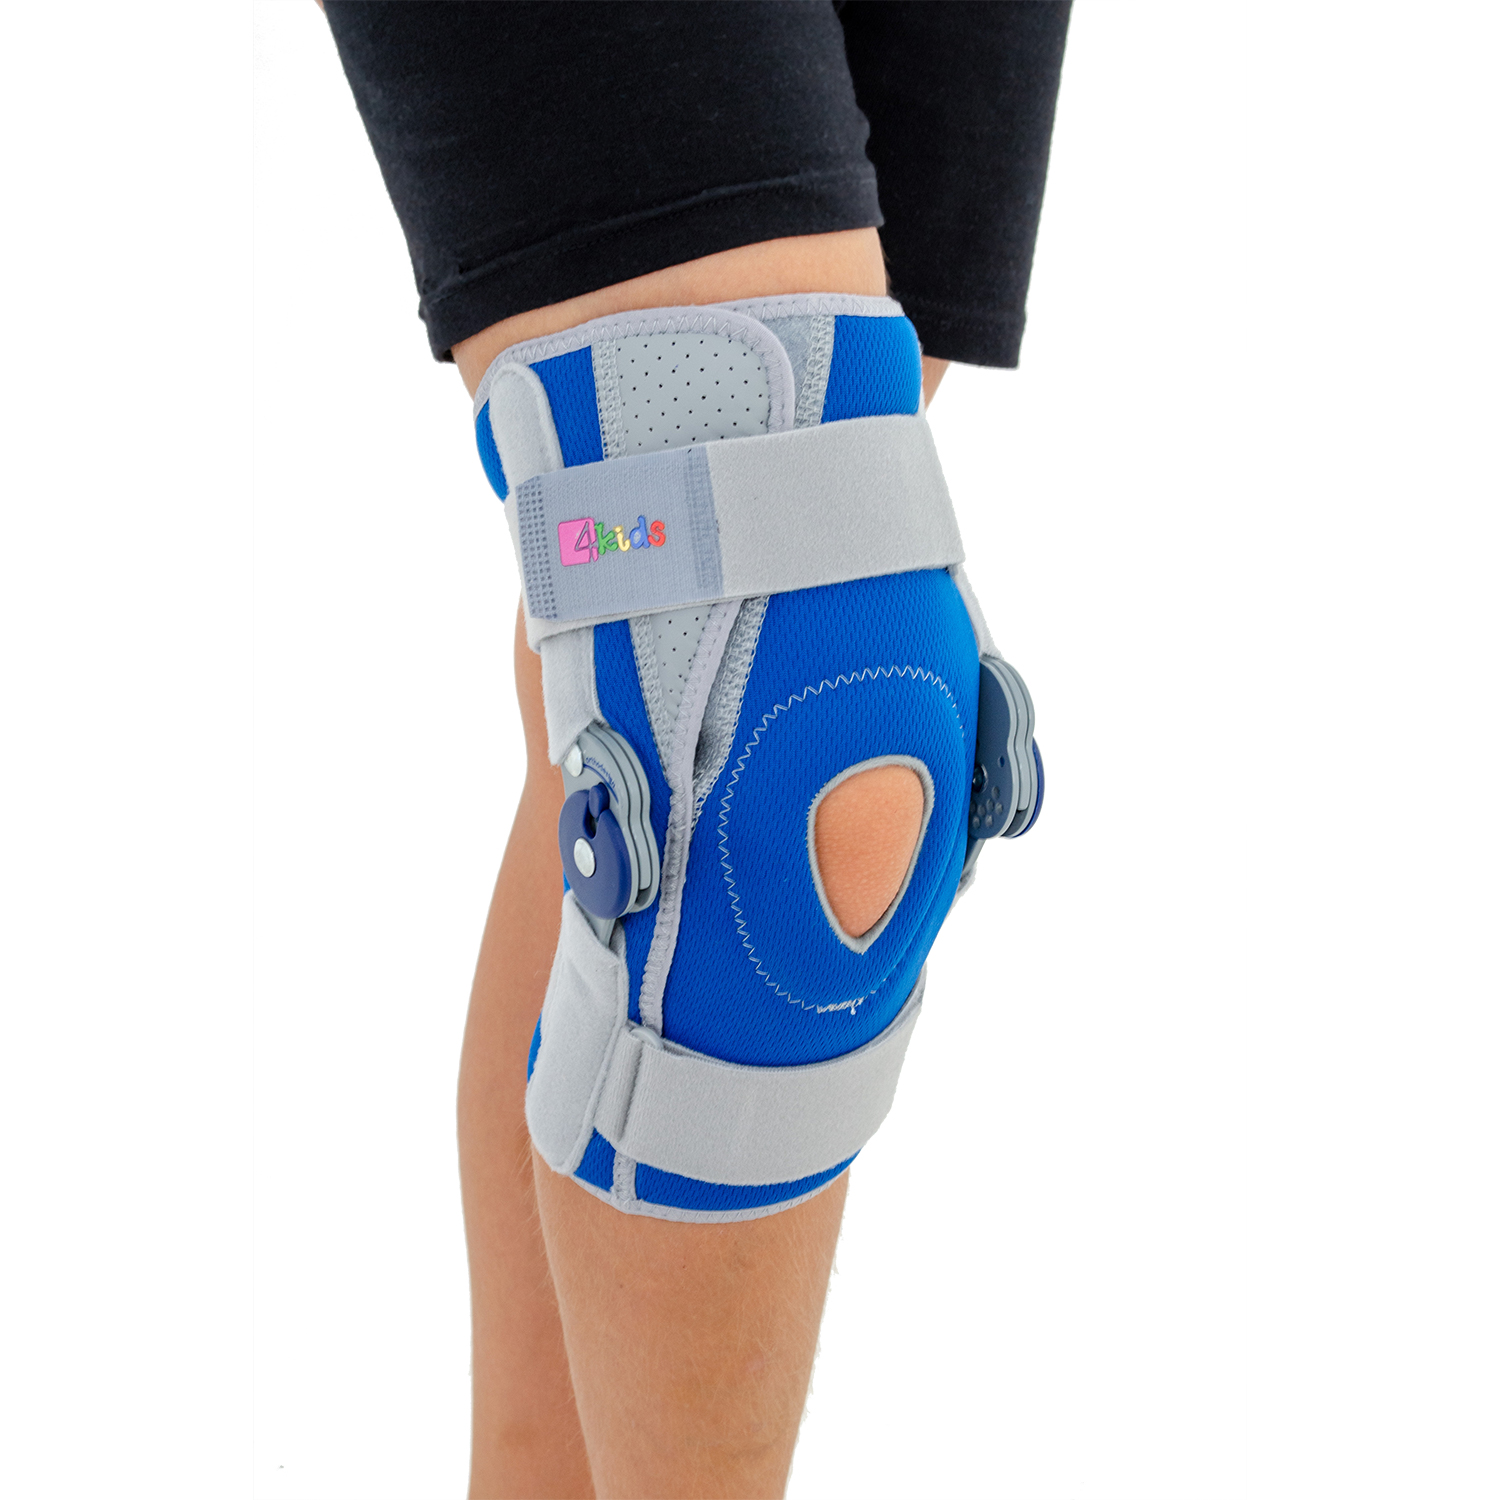 5 Best Knee Braces For Arthritis Pain Relief [Dr. Recommended]